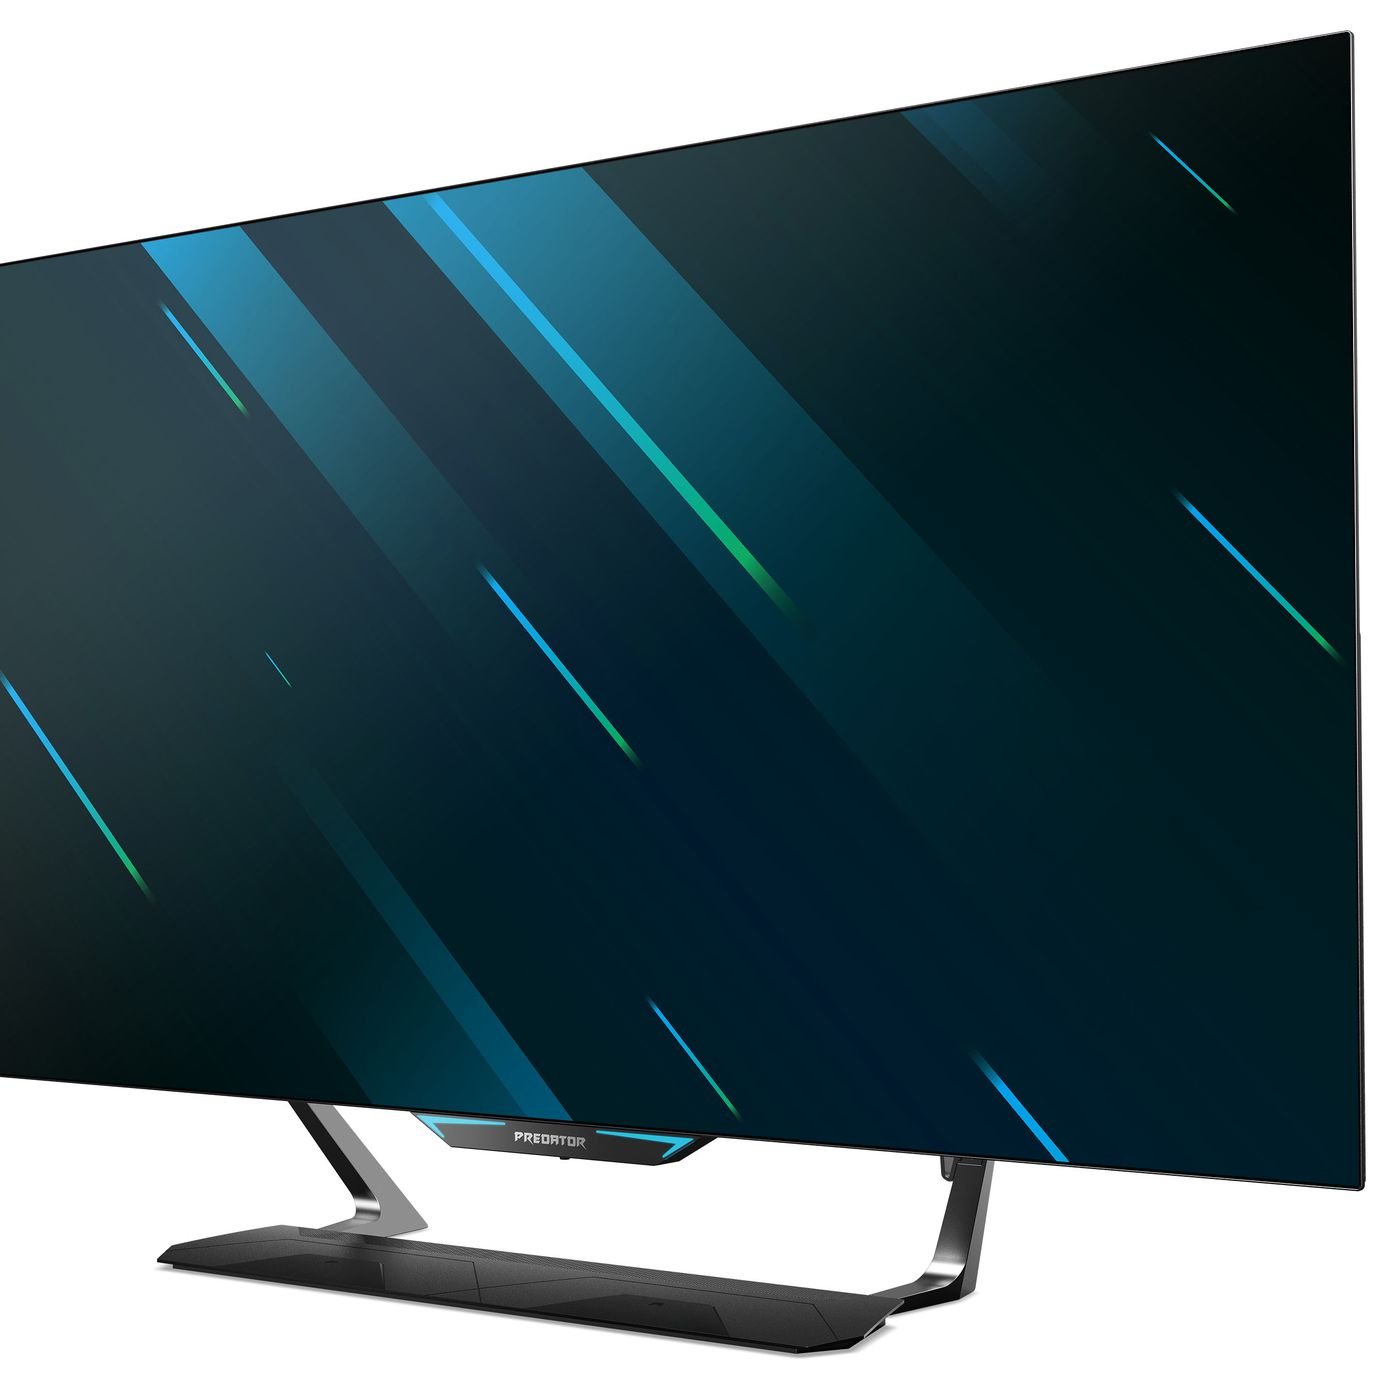 Acer's 55 inch 4K Gaming Monitor